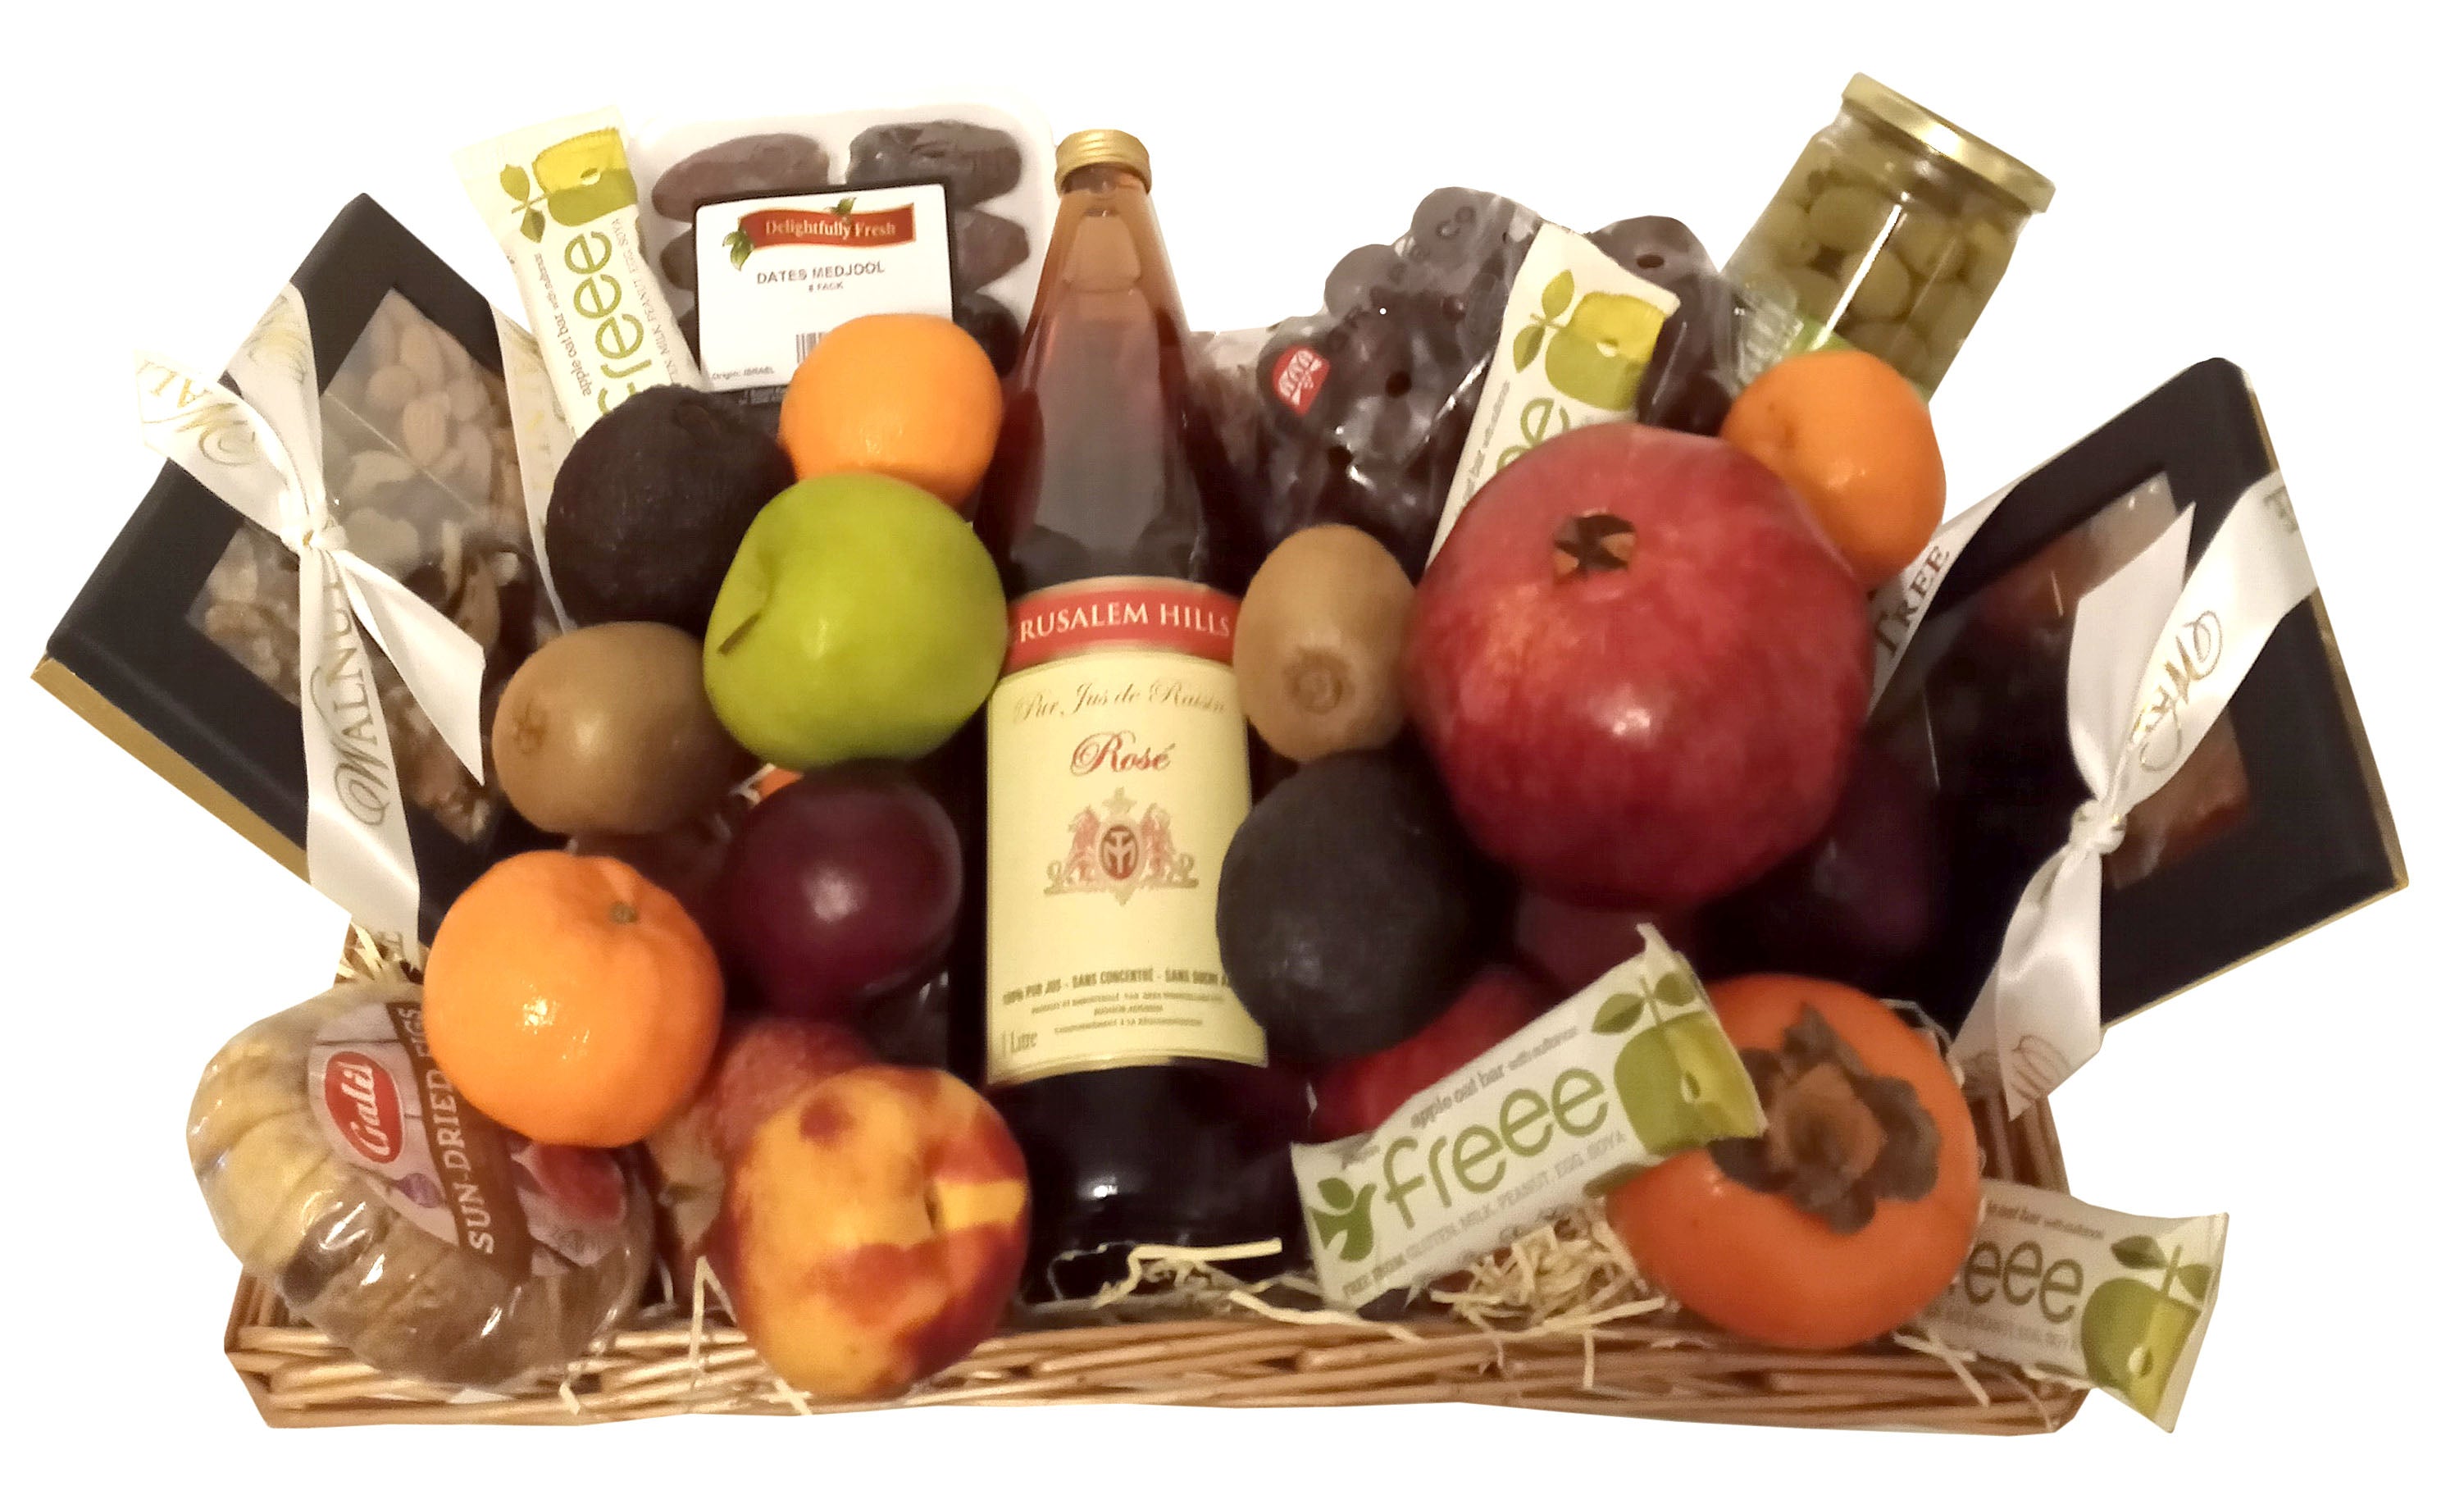 Kosher Gluten Free Deluxe Basket. Kosher Fruit Gift Basket with Grape Juice Or French Wine, Pomegranate, Dates, Olives, Grapes, Dried Fruits, Nuts, Fresh Fruit. Delivered to Hendon, Golders Green. London